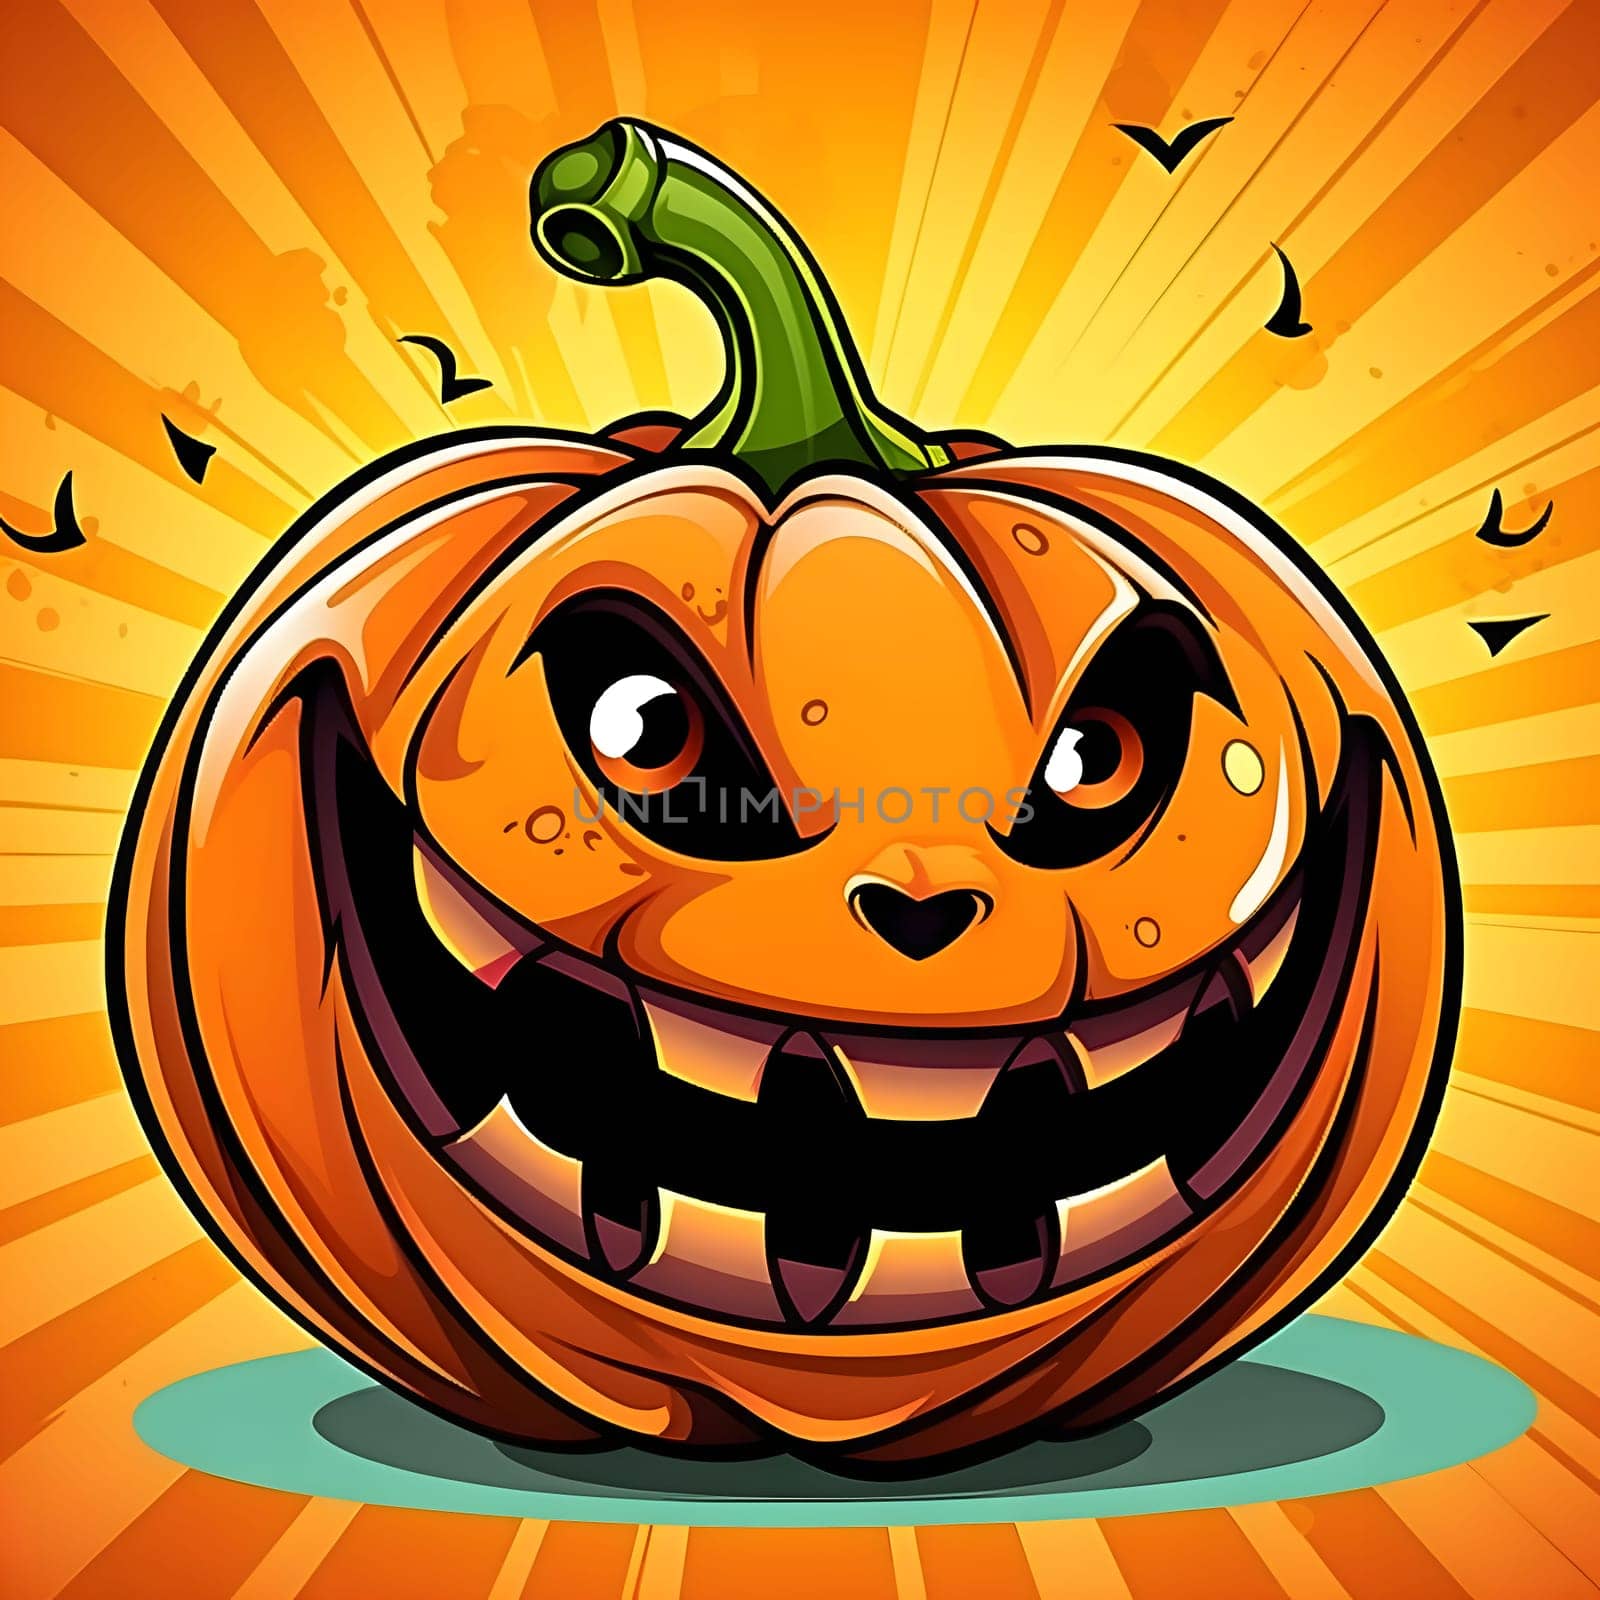 Sinister jack-o-lantern pumpkin with a dark smile on a bright radiant background, a Halloween image. by ThemesS